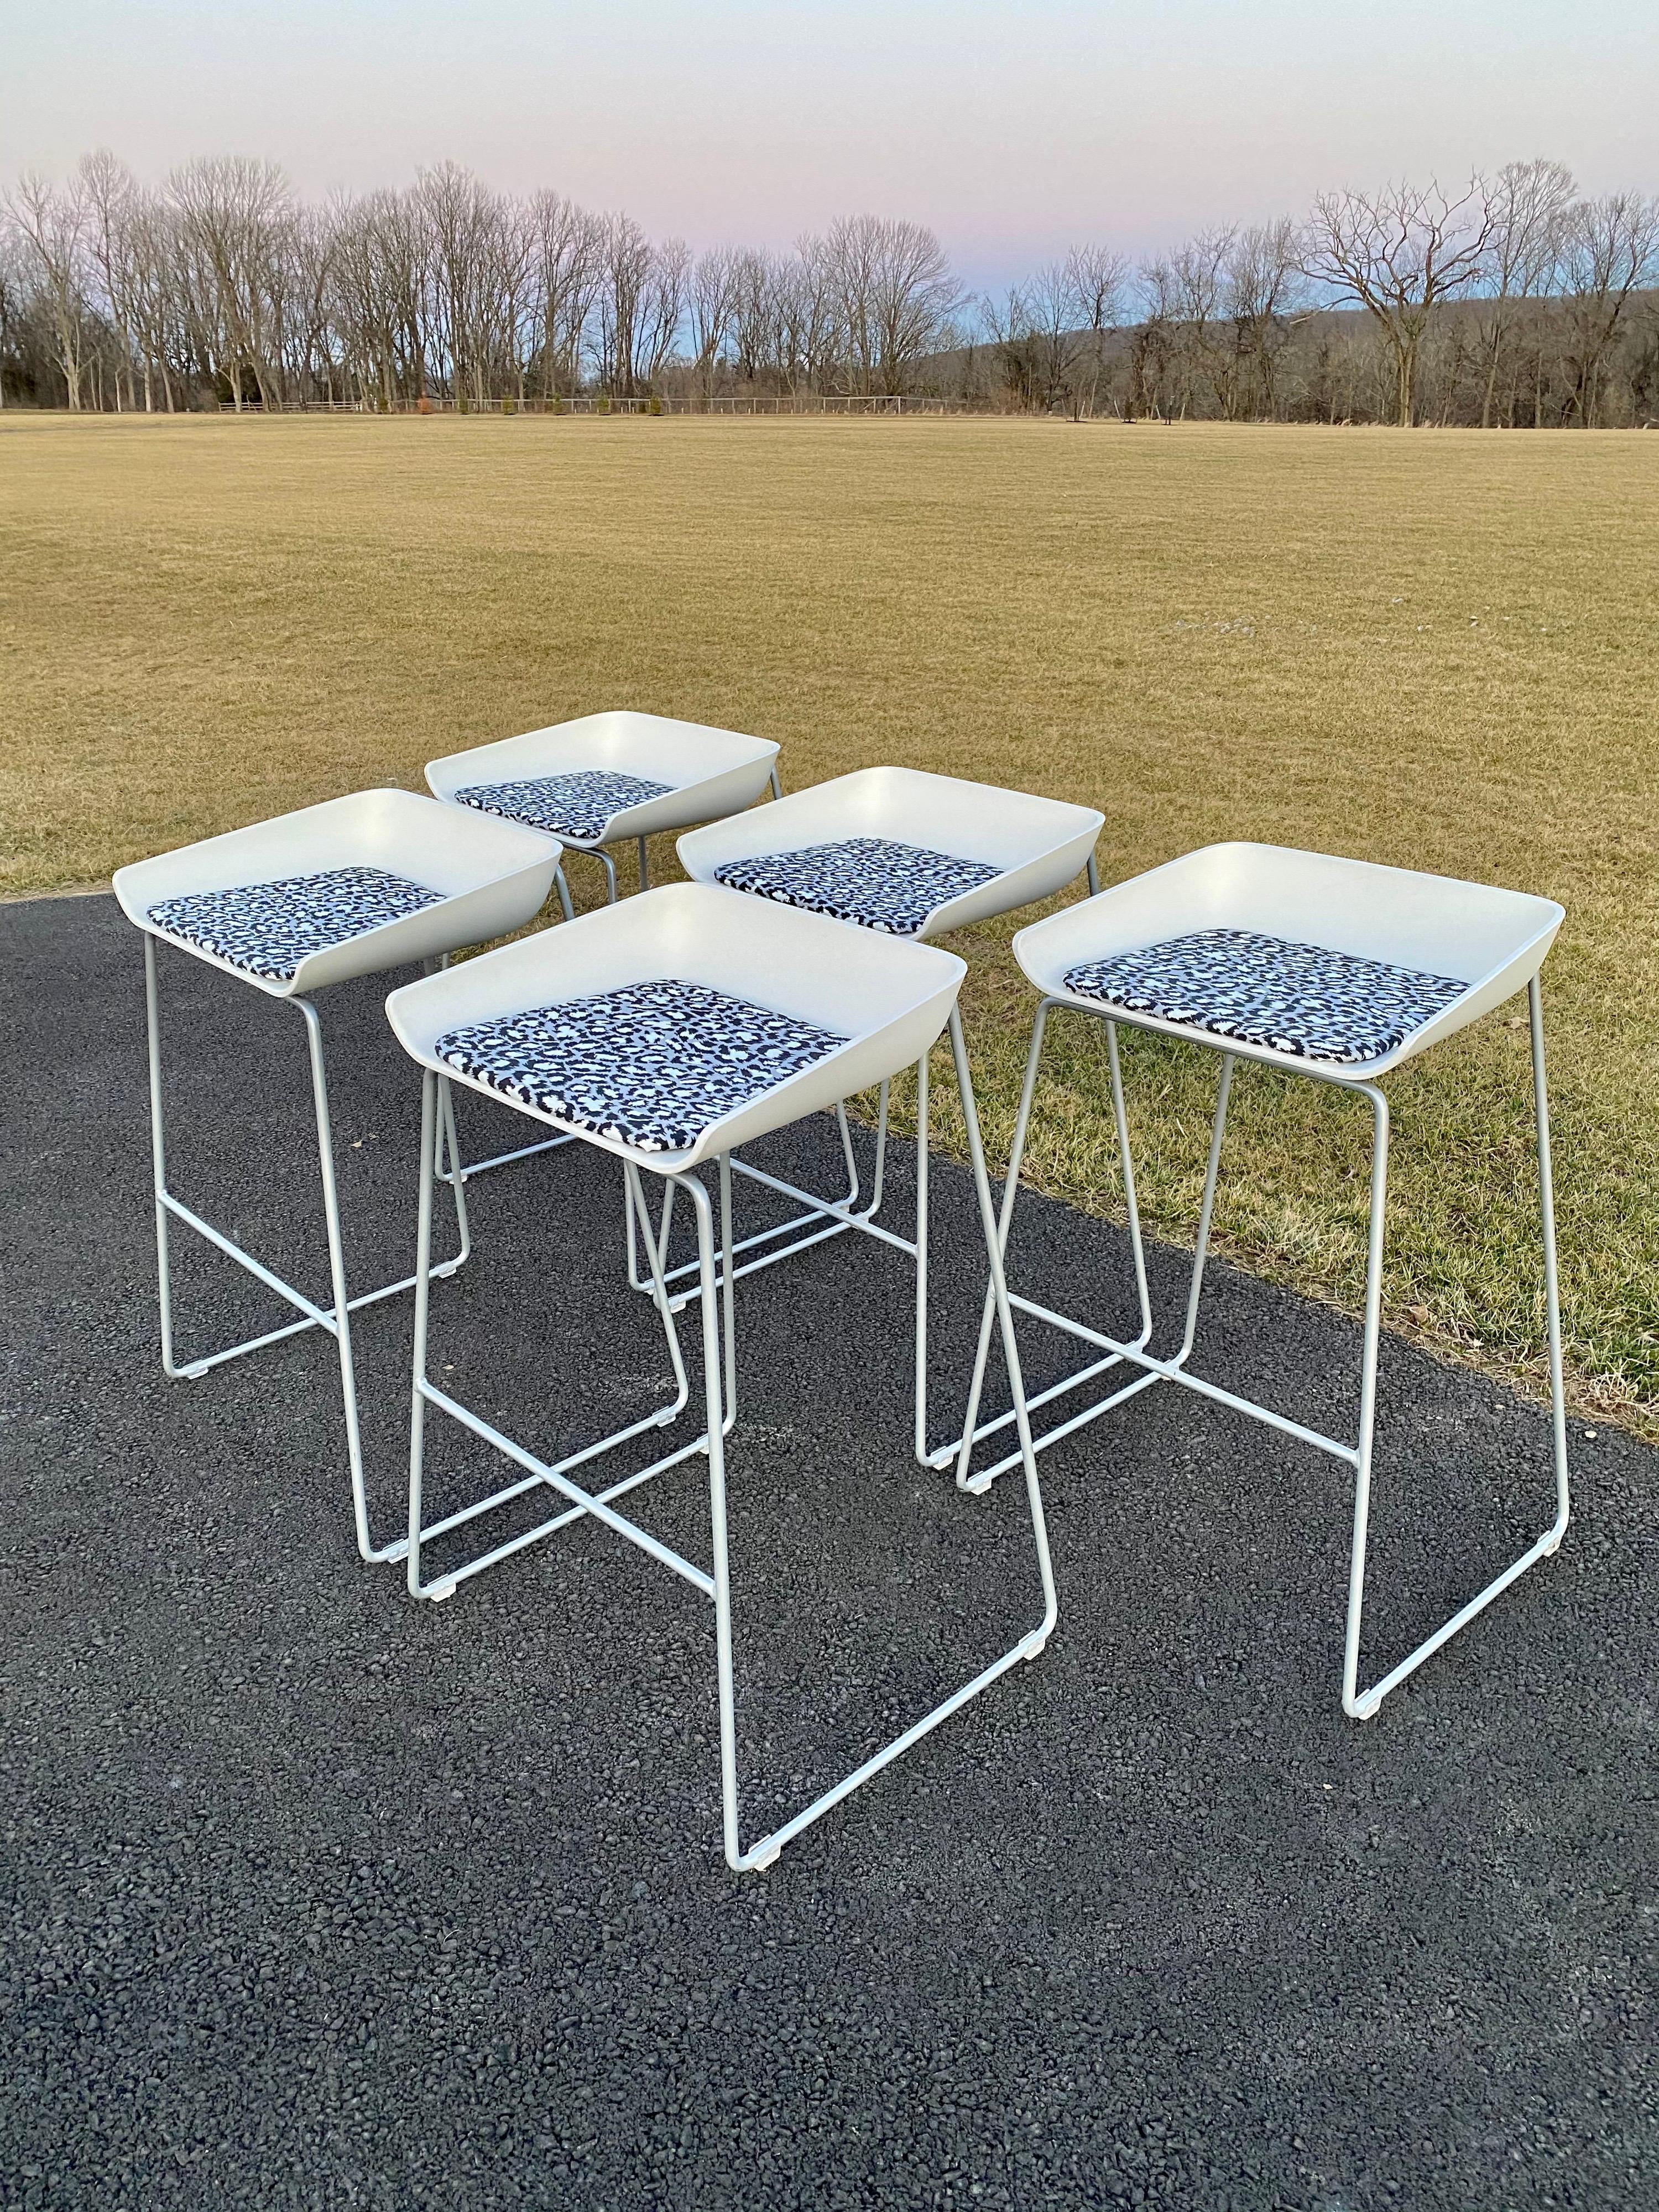 Sculptural Steelcase Bar Stools with Diane von Furstenberg Leopard Cushions In Good Condition For Sale In Lambertville, NJ